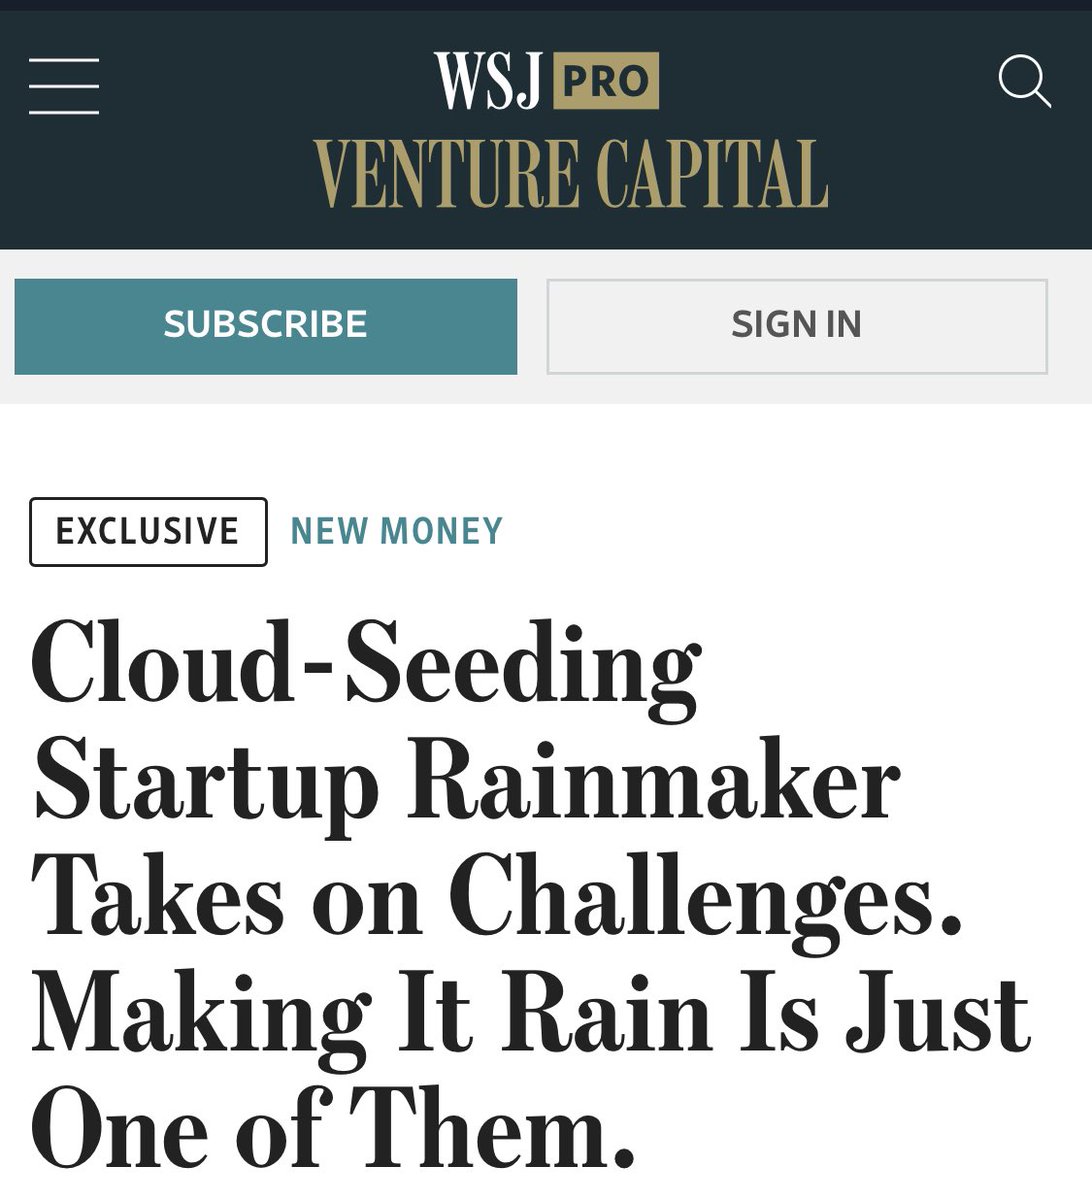 Announcing @RainmakerCorp ‘s $6.3M seed from @LongJourneyVC @1517fund @starship_vc @tamarackglobal @dayoneventures and angels like @garrytan and @balajis Our farms and ecosystems at risk of collapse because we are running out of water. Rainmaker’s cloud seeding solves this.